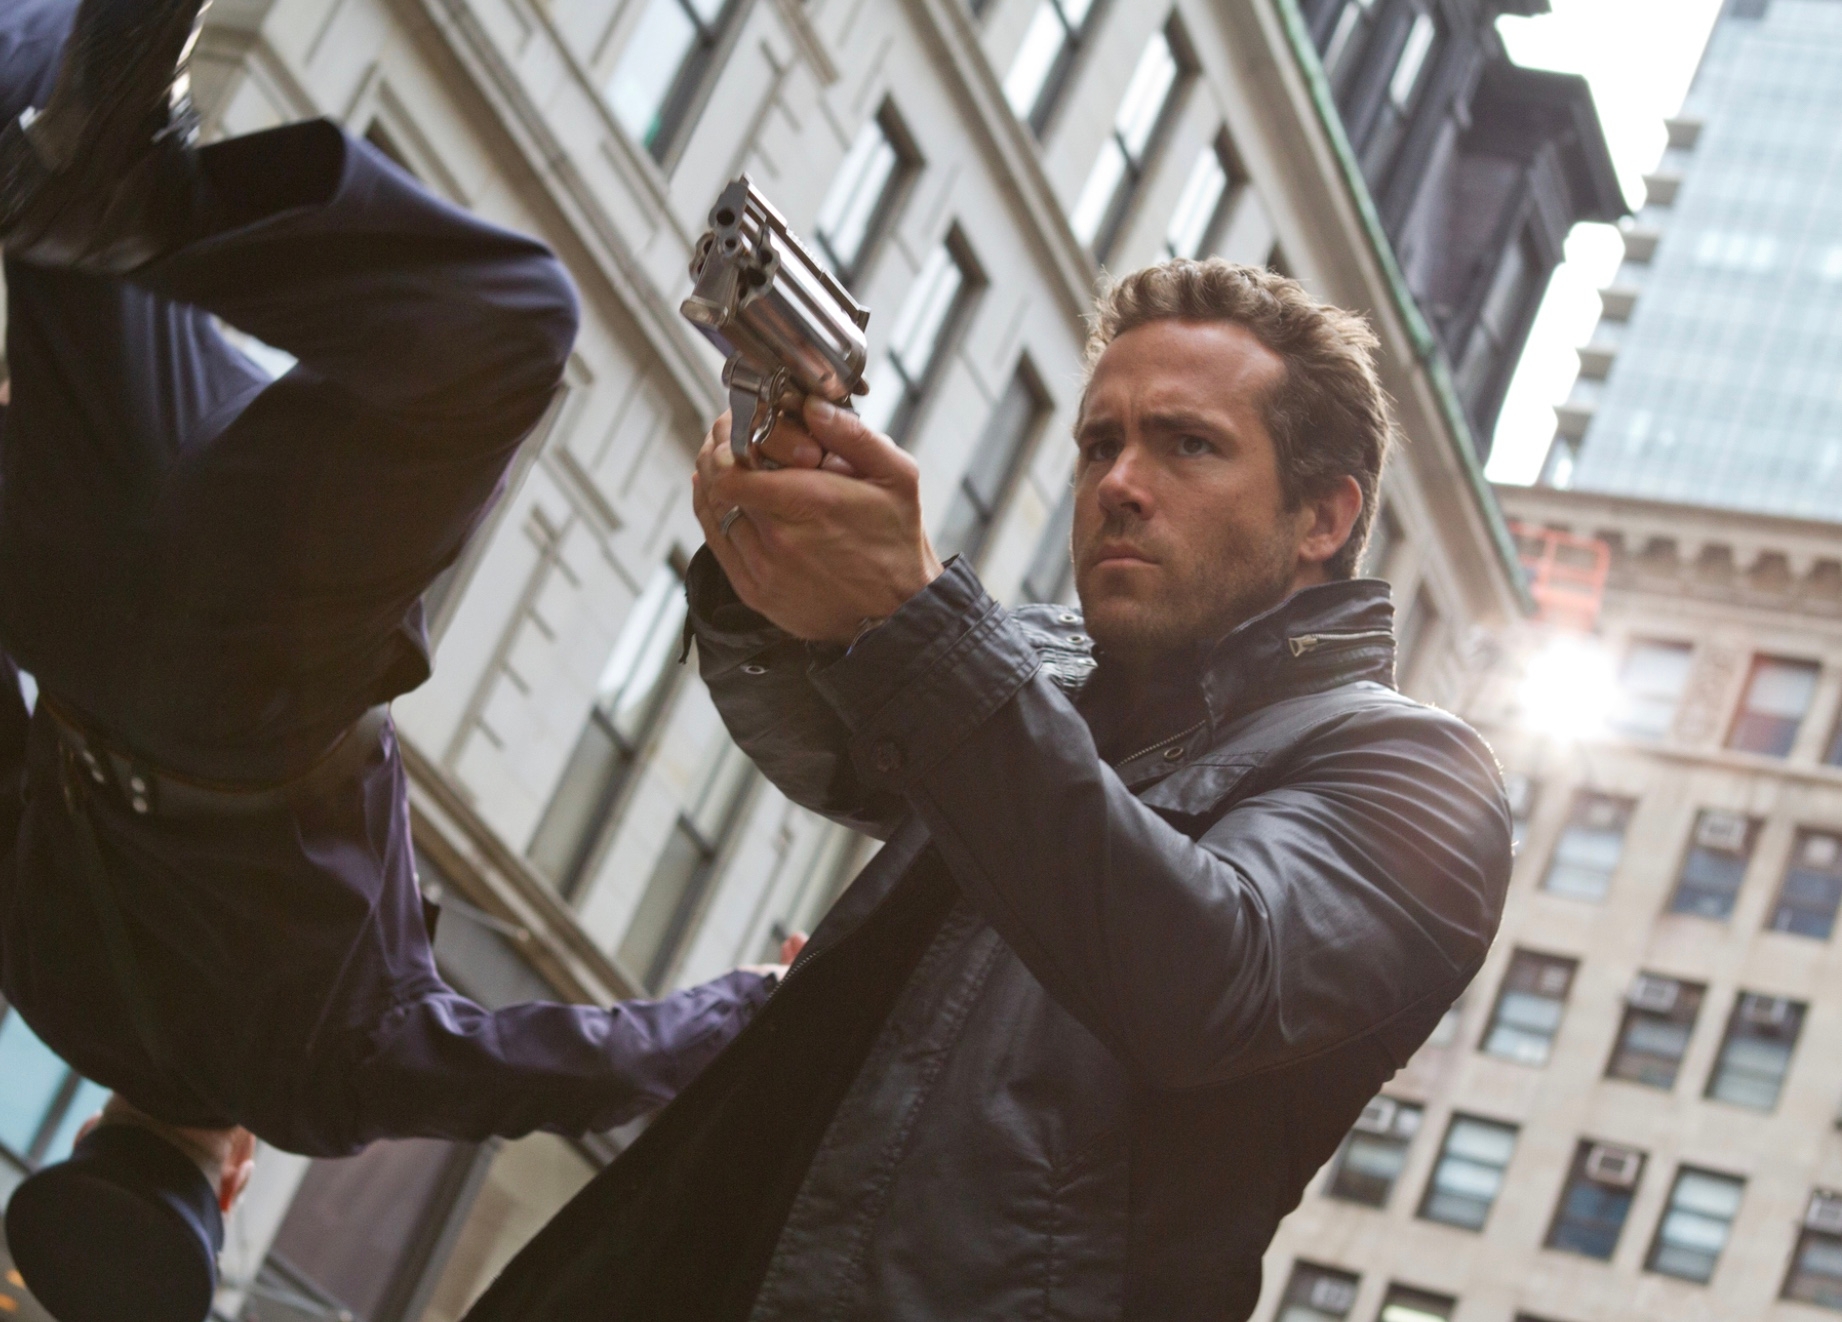 RIPD 2: There Is Actually A Sequel To One Of Ryan Reynolds's Worst